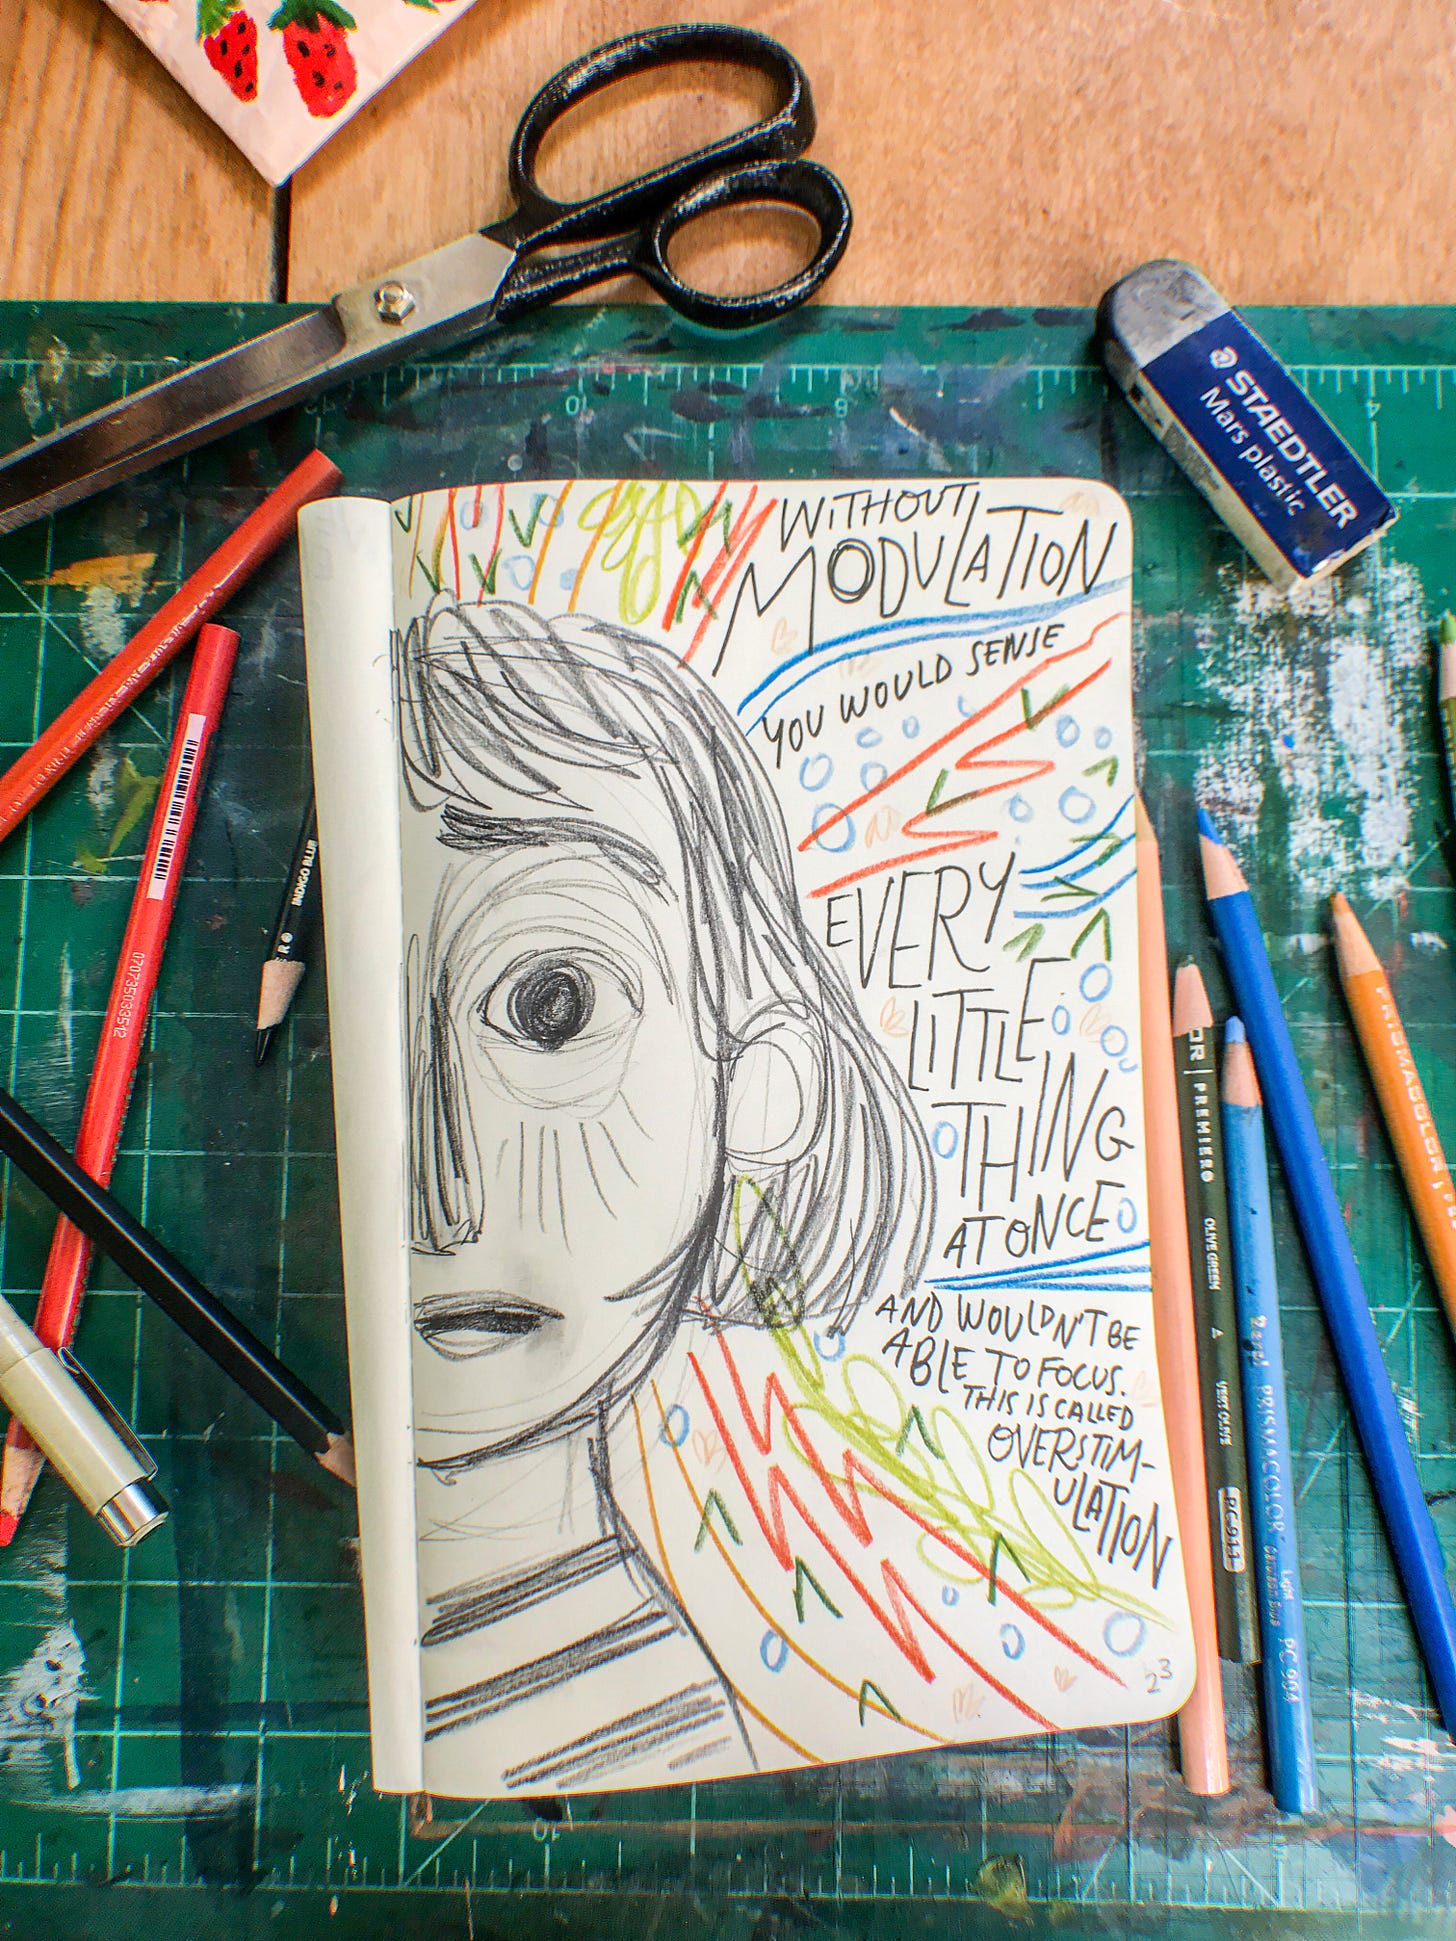 Sketchbook surrounded by materials. Pencil drawn face with wide eyes and jagged lines. Text reads: Without modulation you would sense every little thing at once and you wouldn't be able to focus. This is called overstimulation.